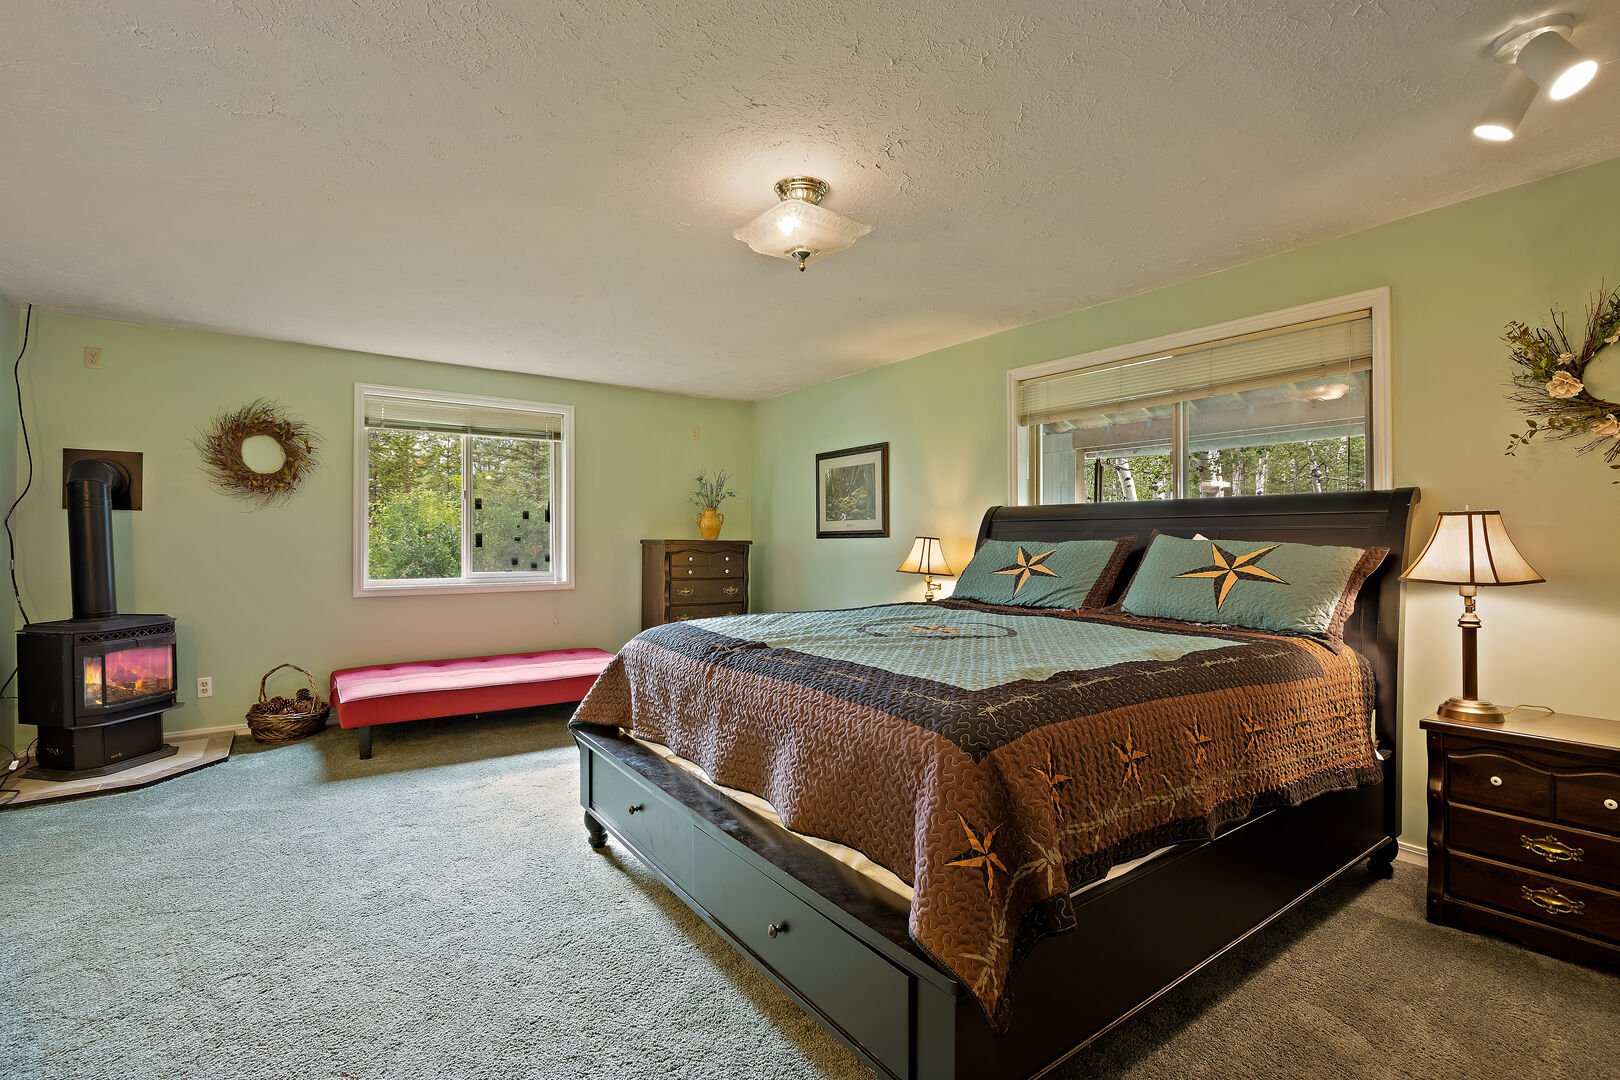 Moose Drool ~ master bedroom #1 on main level w/ king bed, futon, private ensuite bathroom w/ large closet